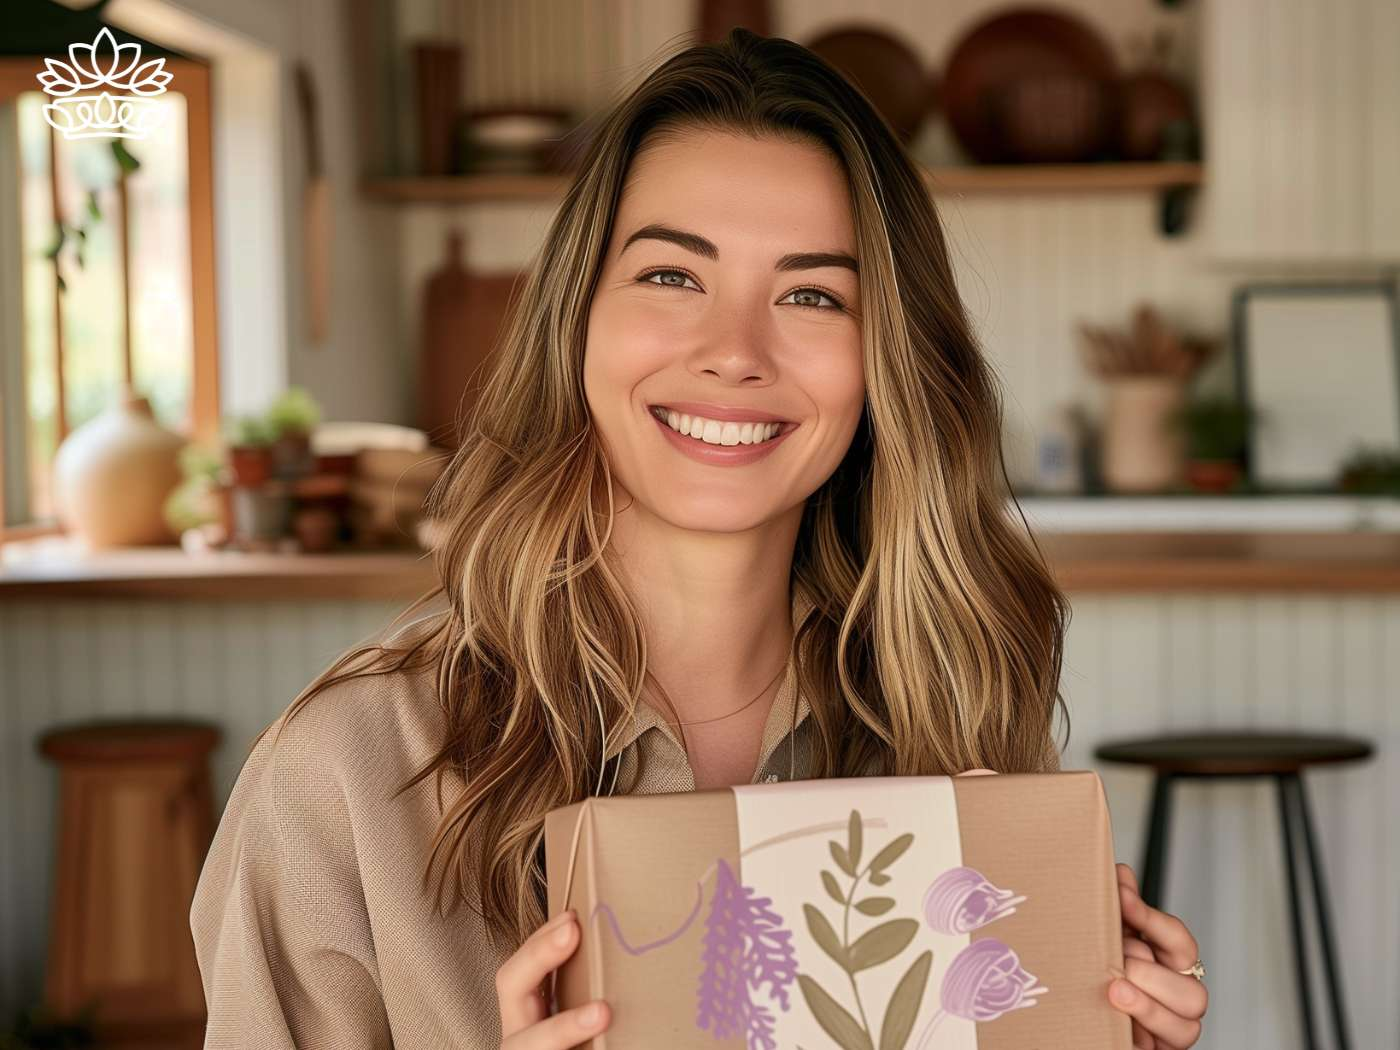 A woman with a beaming smile holding a beautifully decorated gift box from the 'All Gift Boxes' collection, showcasing the quality and joy offered by Fabulous Flowers and Gifts